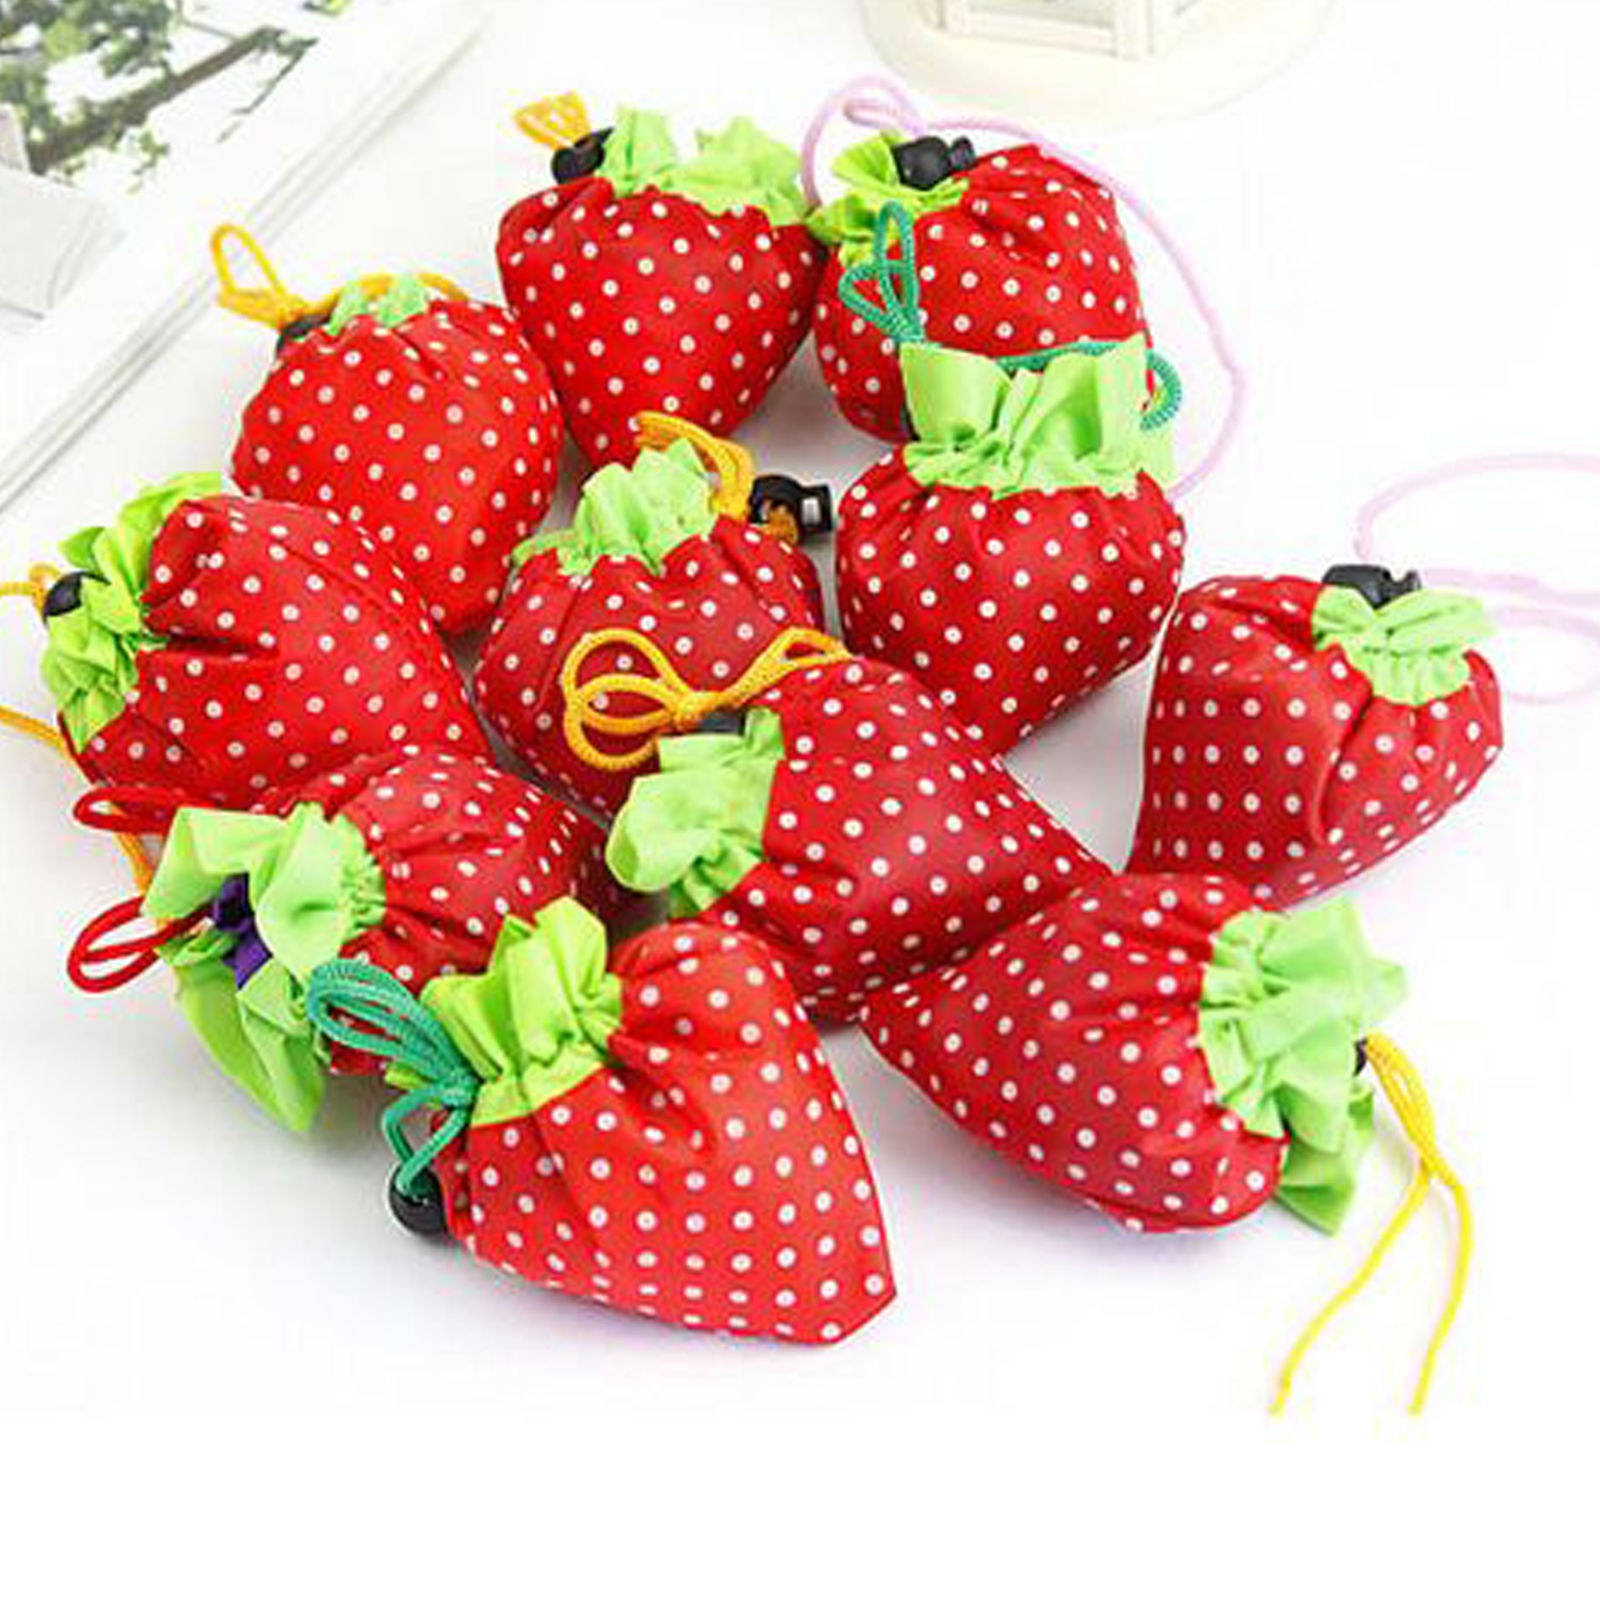 Cute Foldable Storage Strawberry Eco Reusable Shopping Recycle Grogery Bag